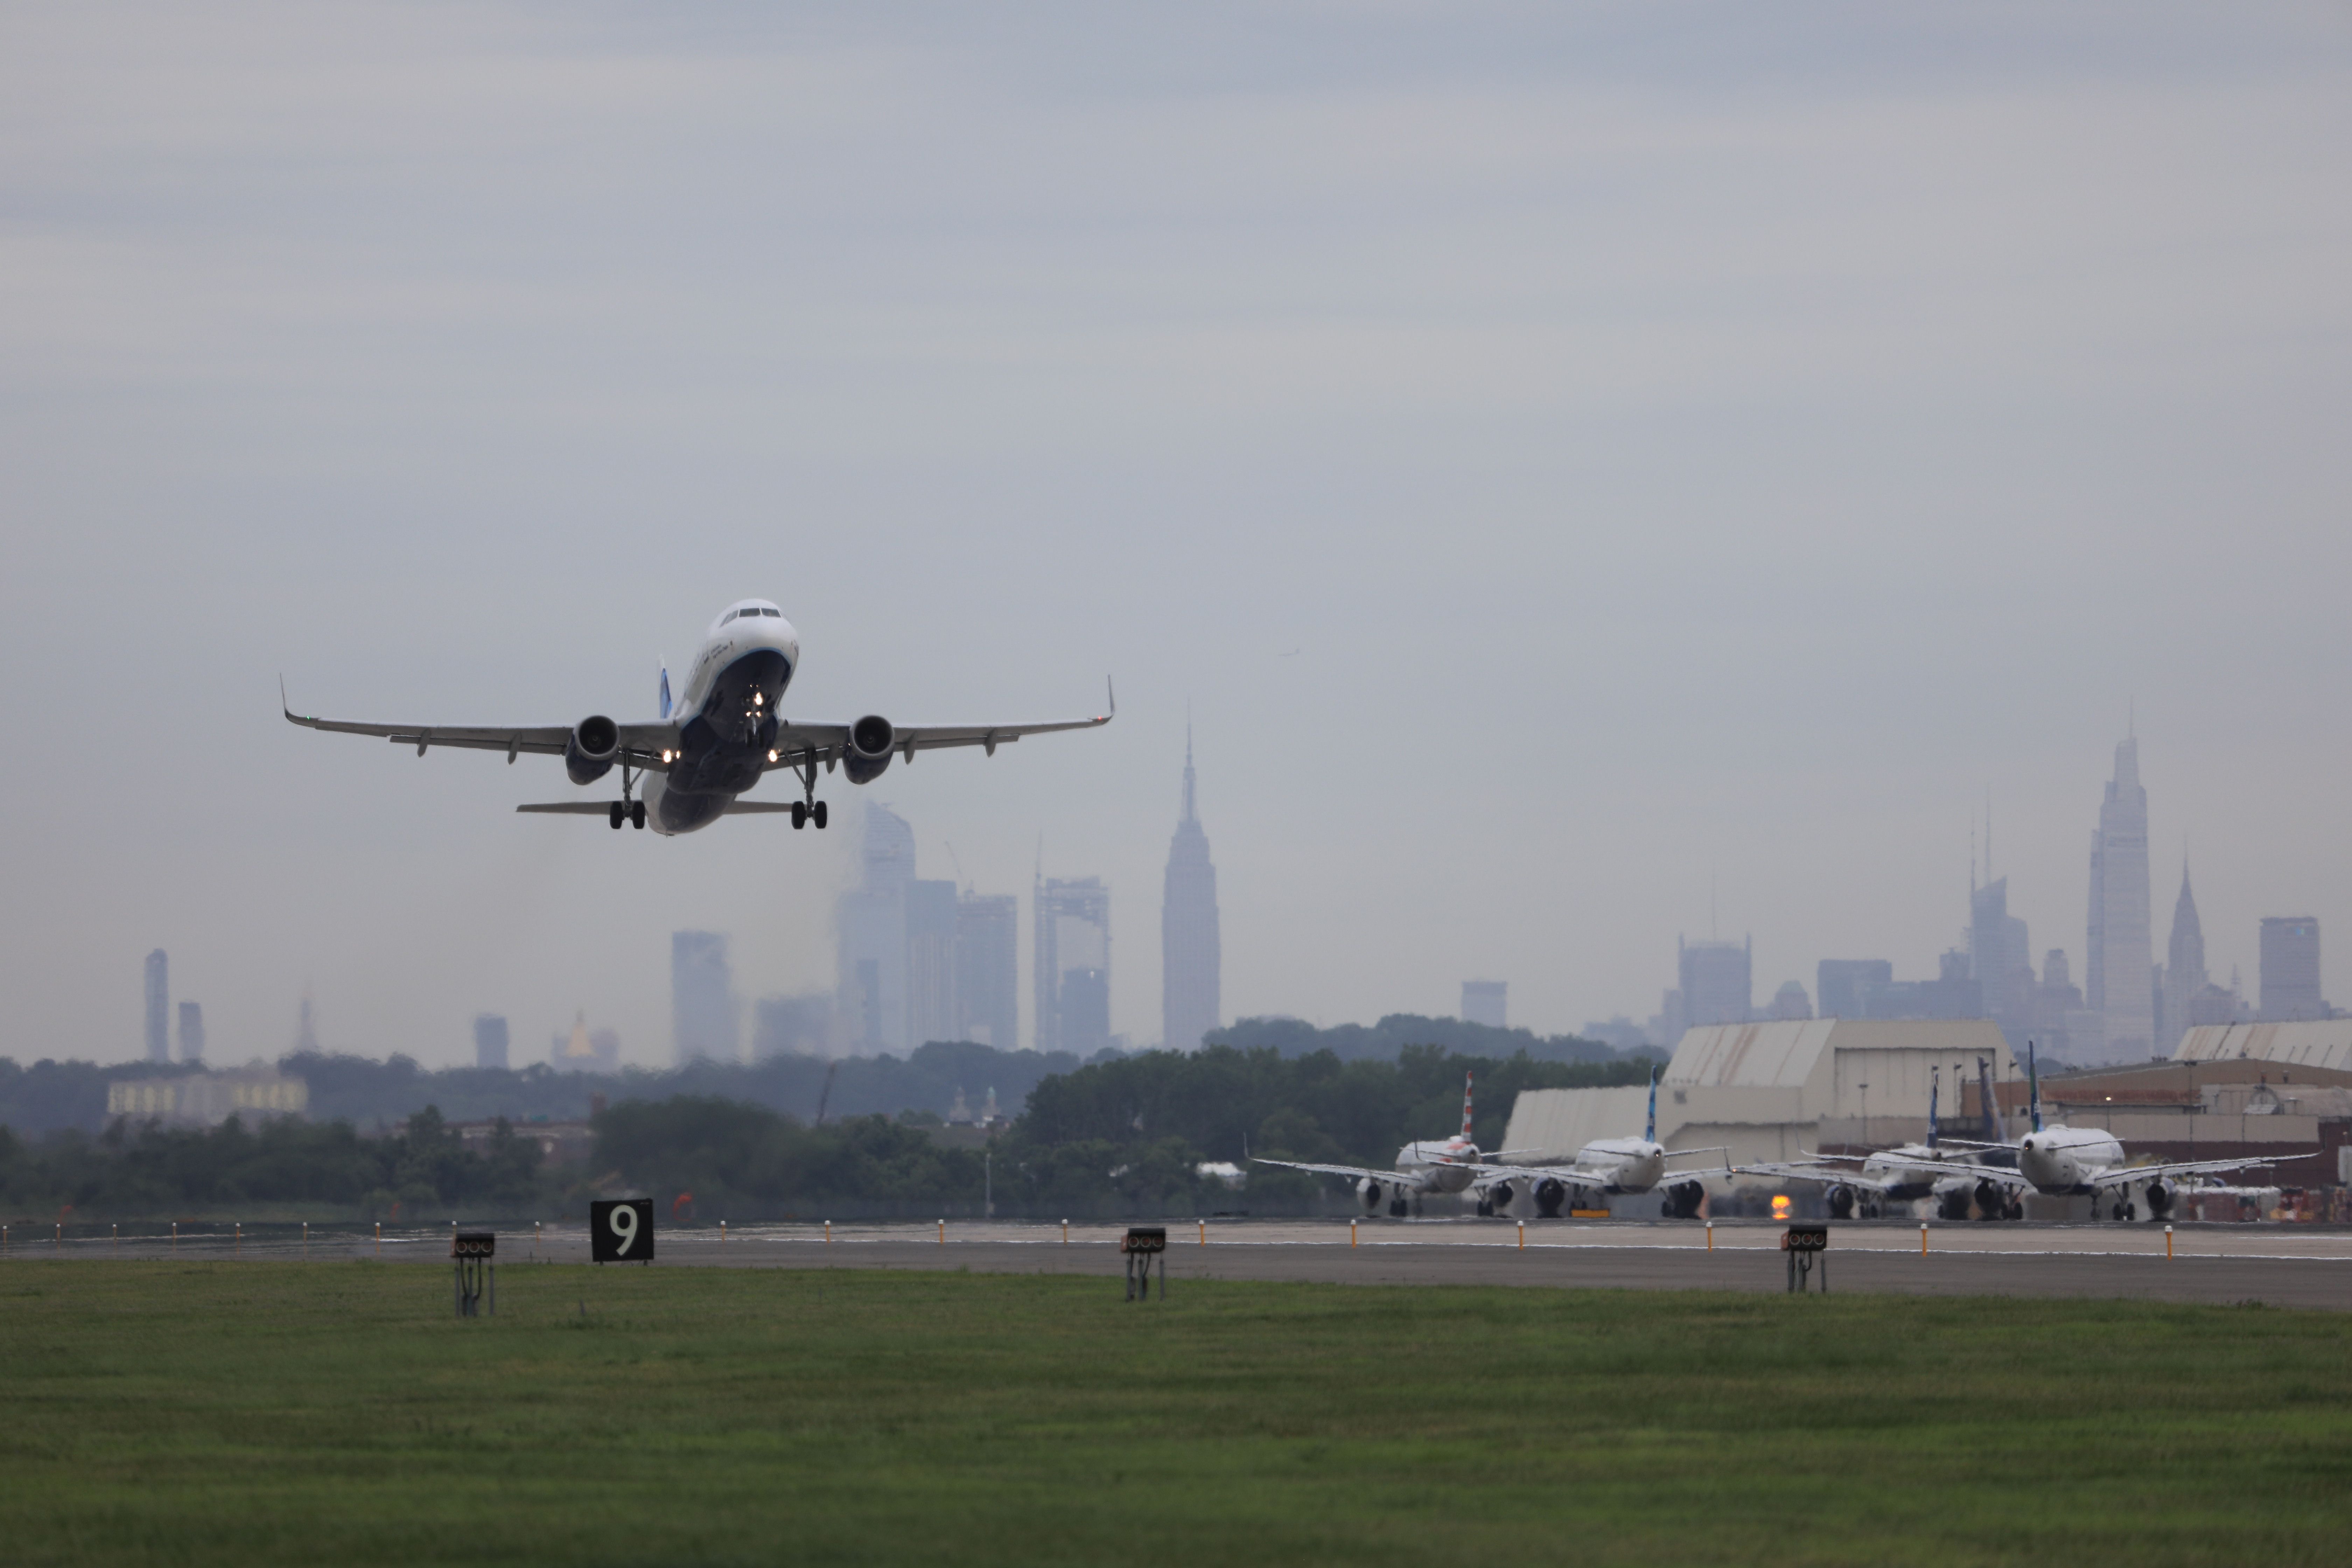 A white jetliner takes off from the runway at JFK airport with the New York City skyline in the backgroundl